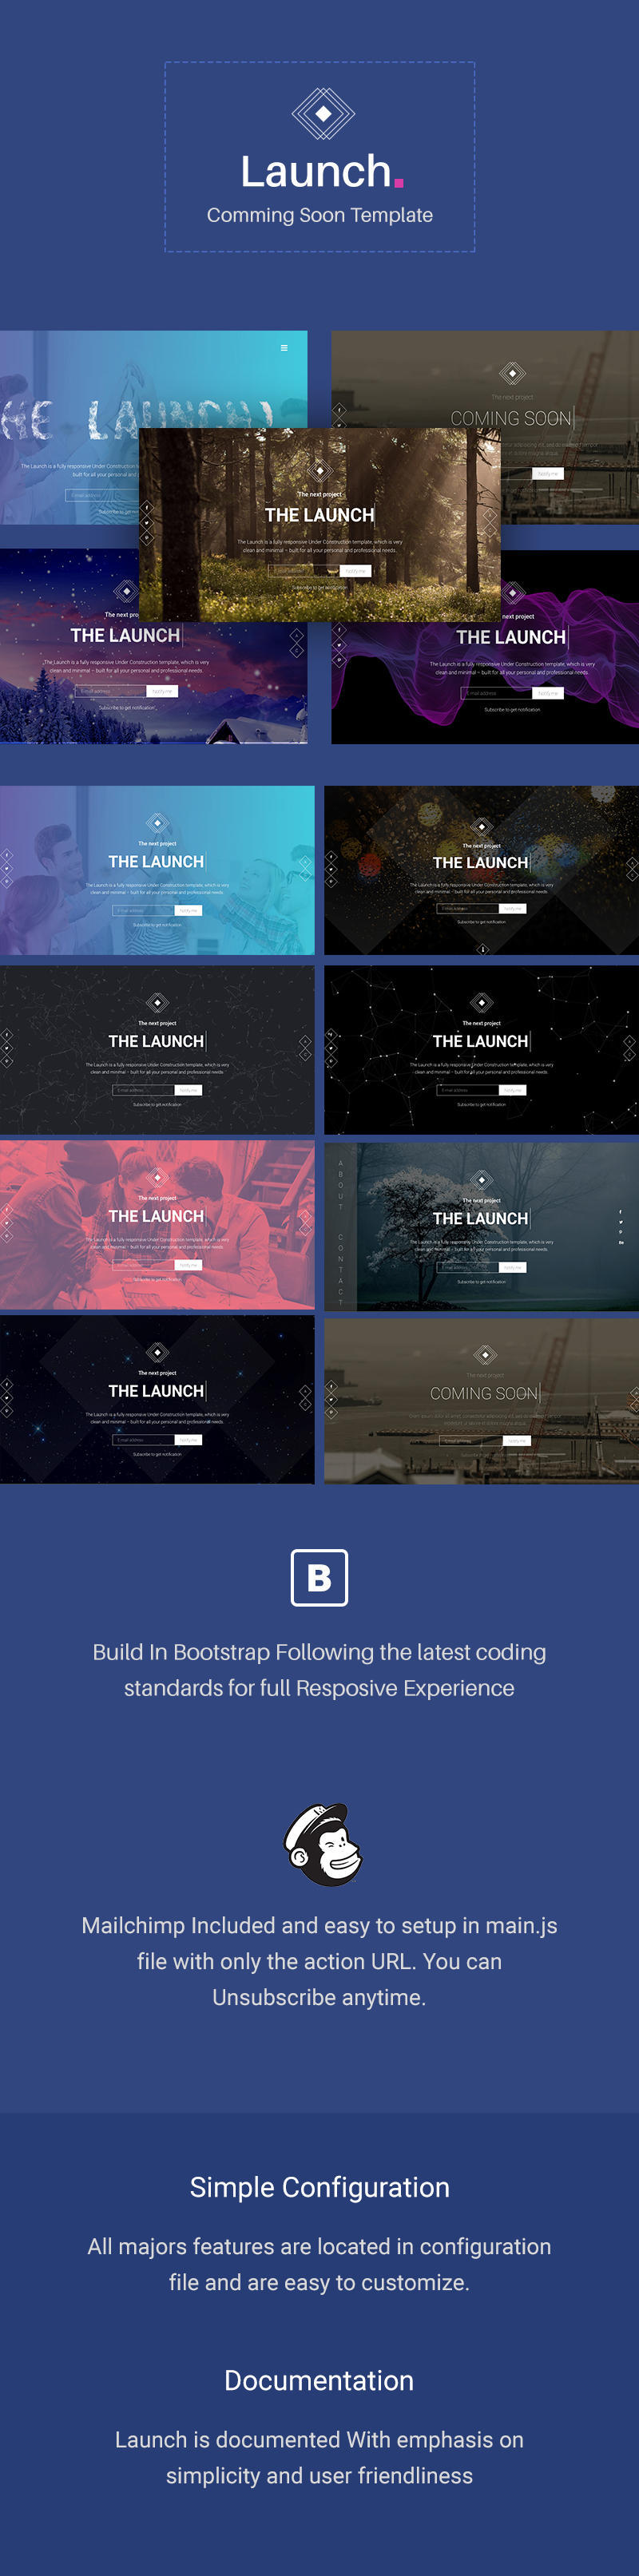 Launch - Coming Soon / Under Construction Template - 1